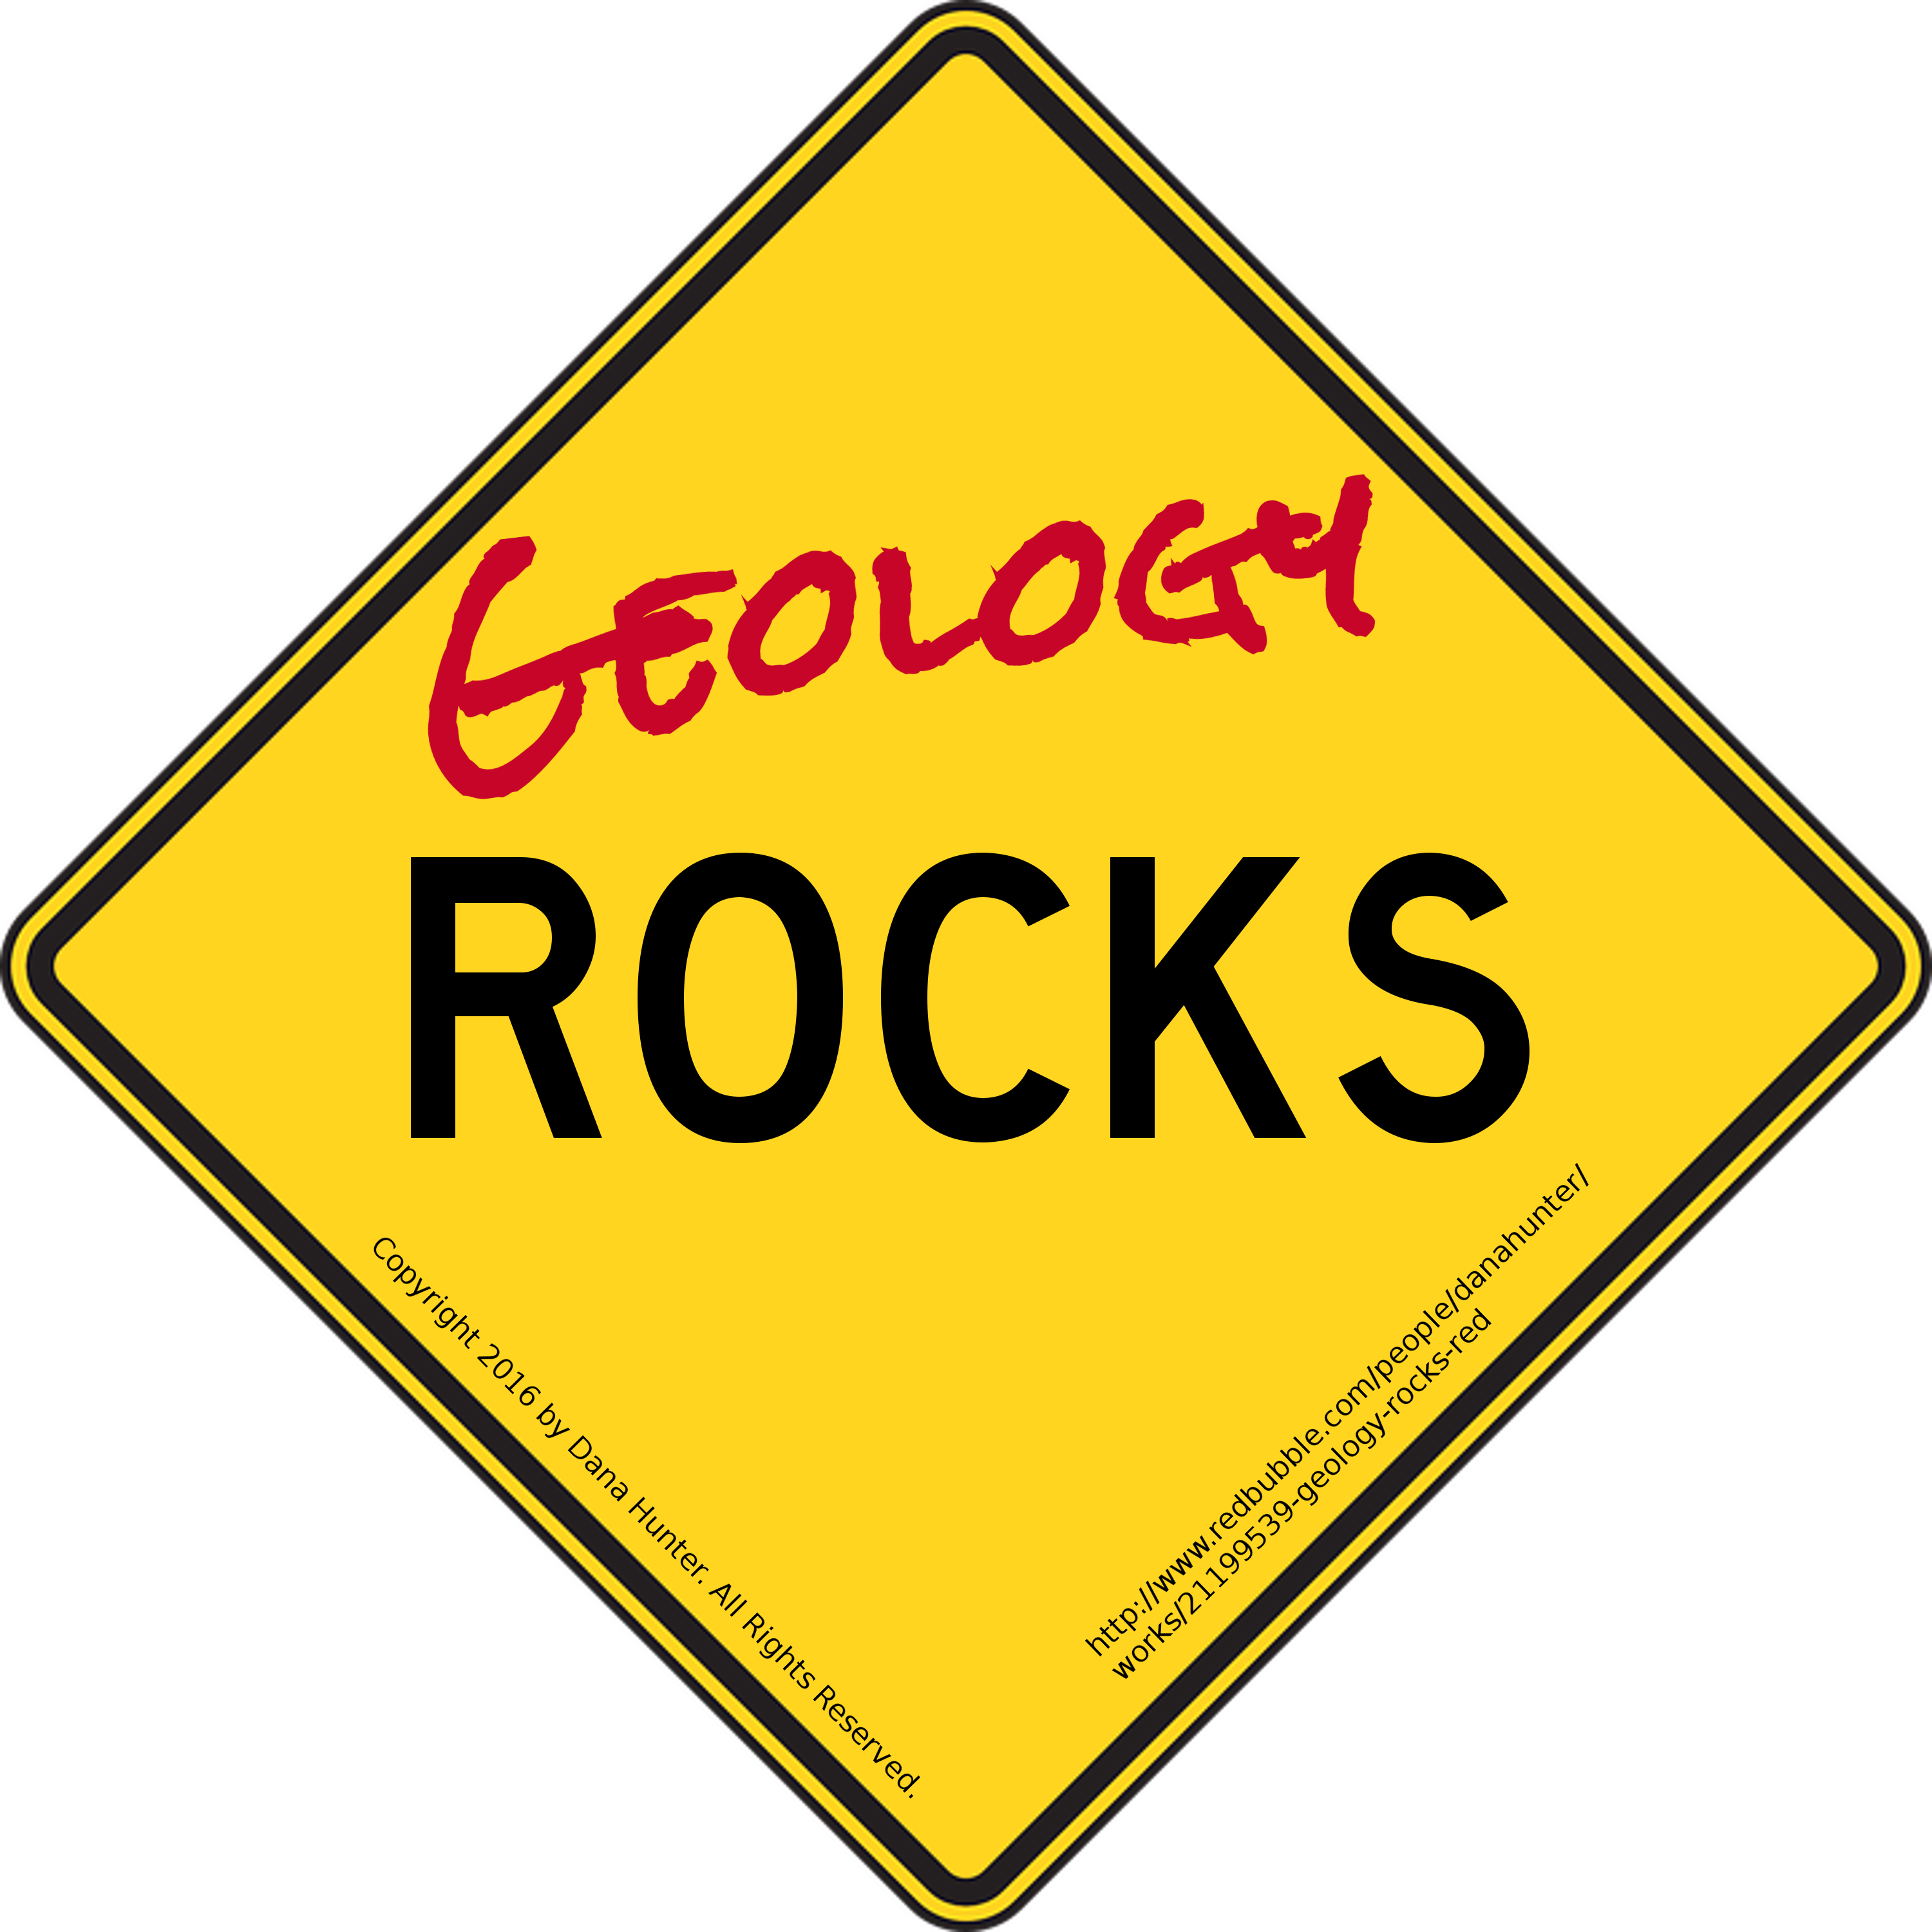 Image shows a diamond-shaped yellow caution sign with ROCKS printed in black in the center. Above it, Geology is written in red.